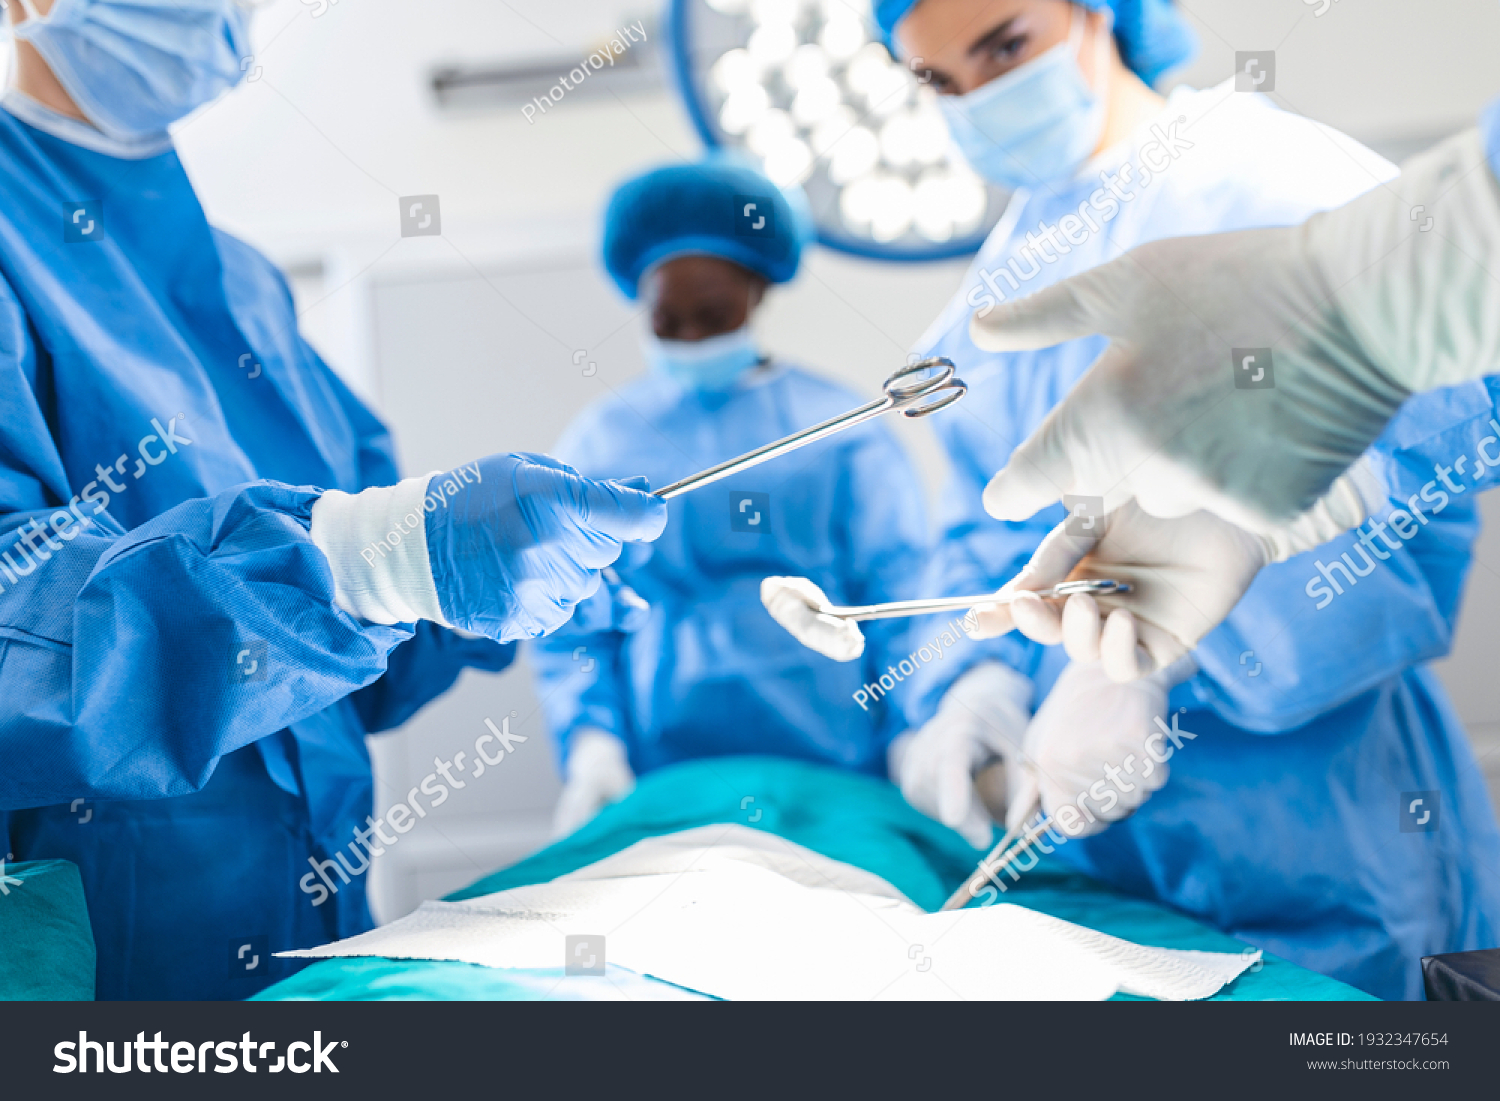 Low Angle Shot in the Operating Room, Assistant Hands out Instruments to Surgeons During Operation. Surgeons Perform Operation. Professional Medical Doctors Performing Surgery. #1932347654